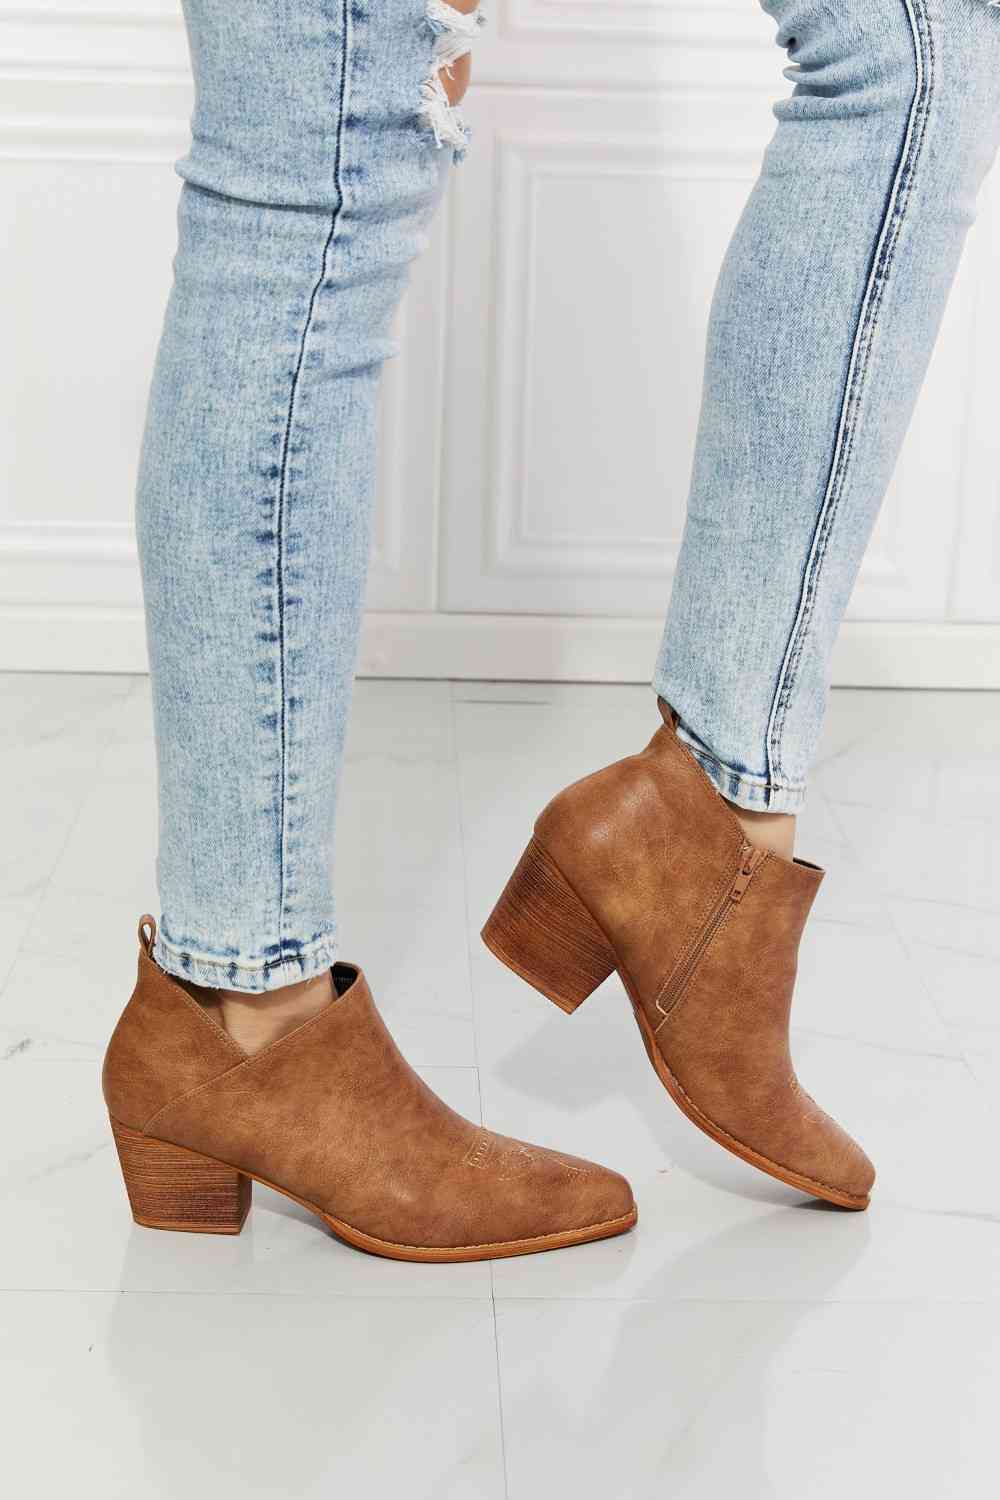 MMShoes Trust Yourself Embroidered Crossover Cowboy Bootie - Caramel